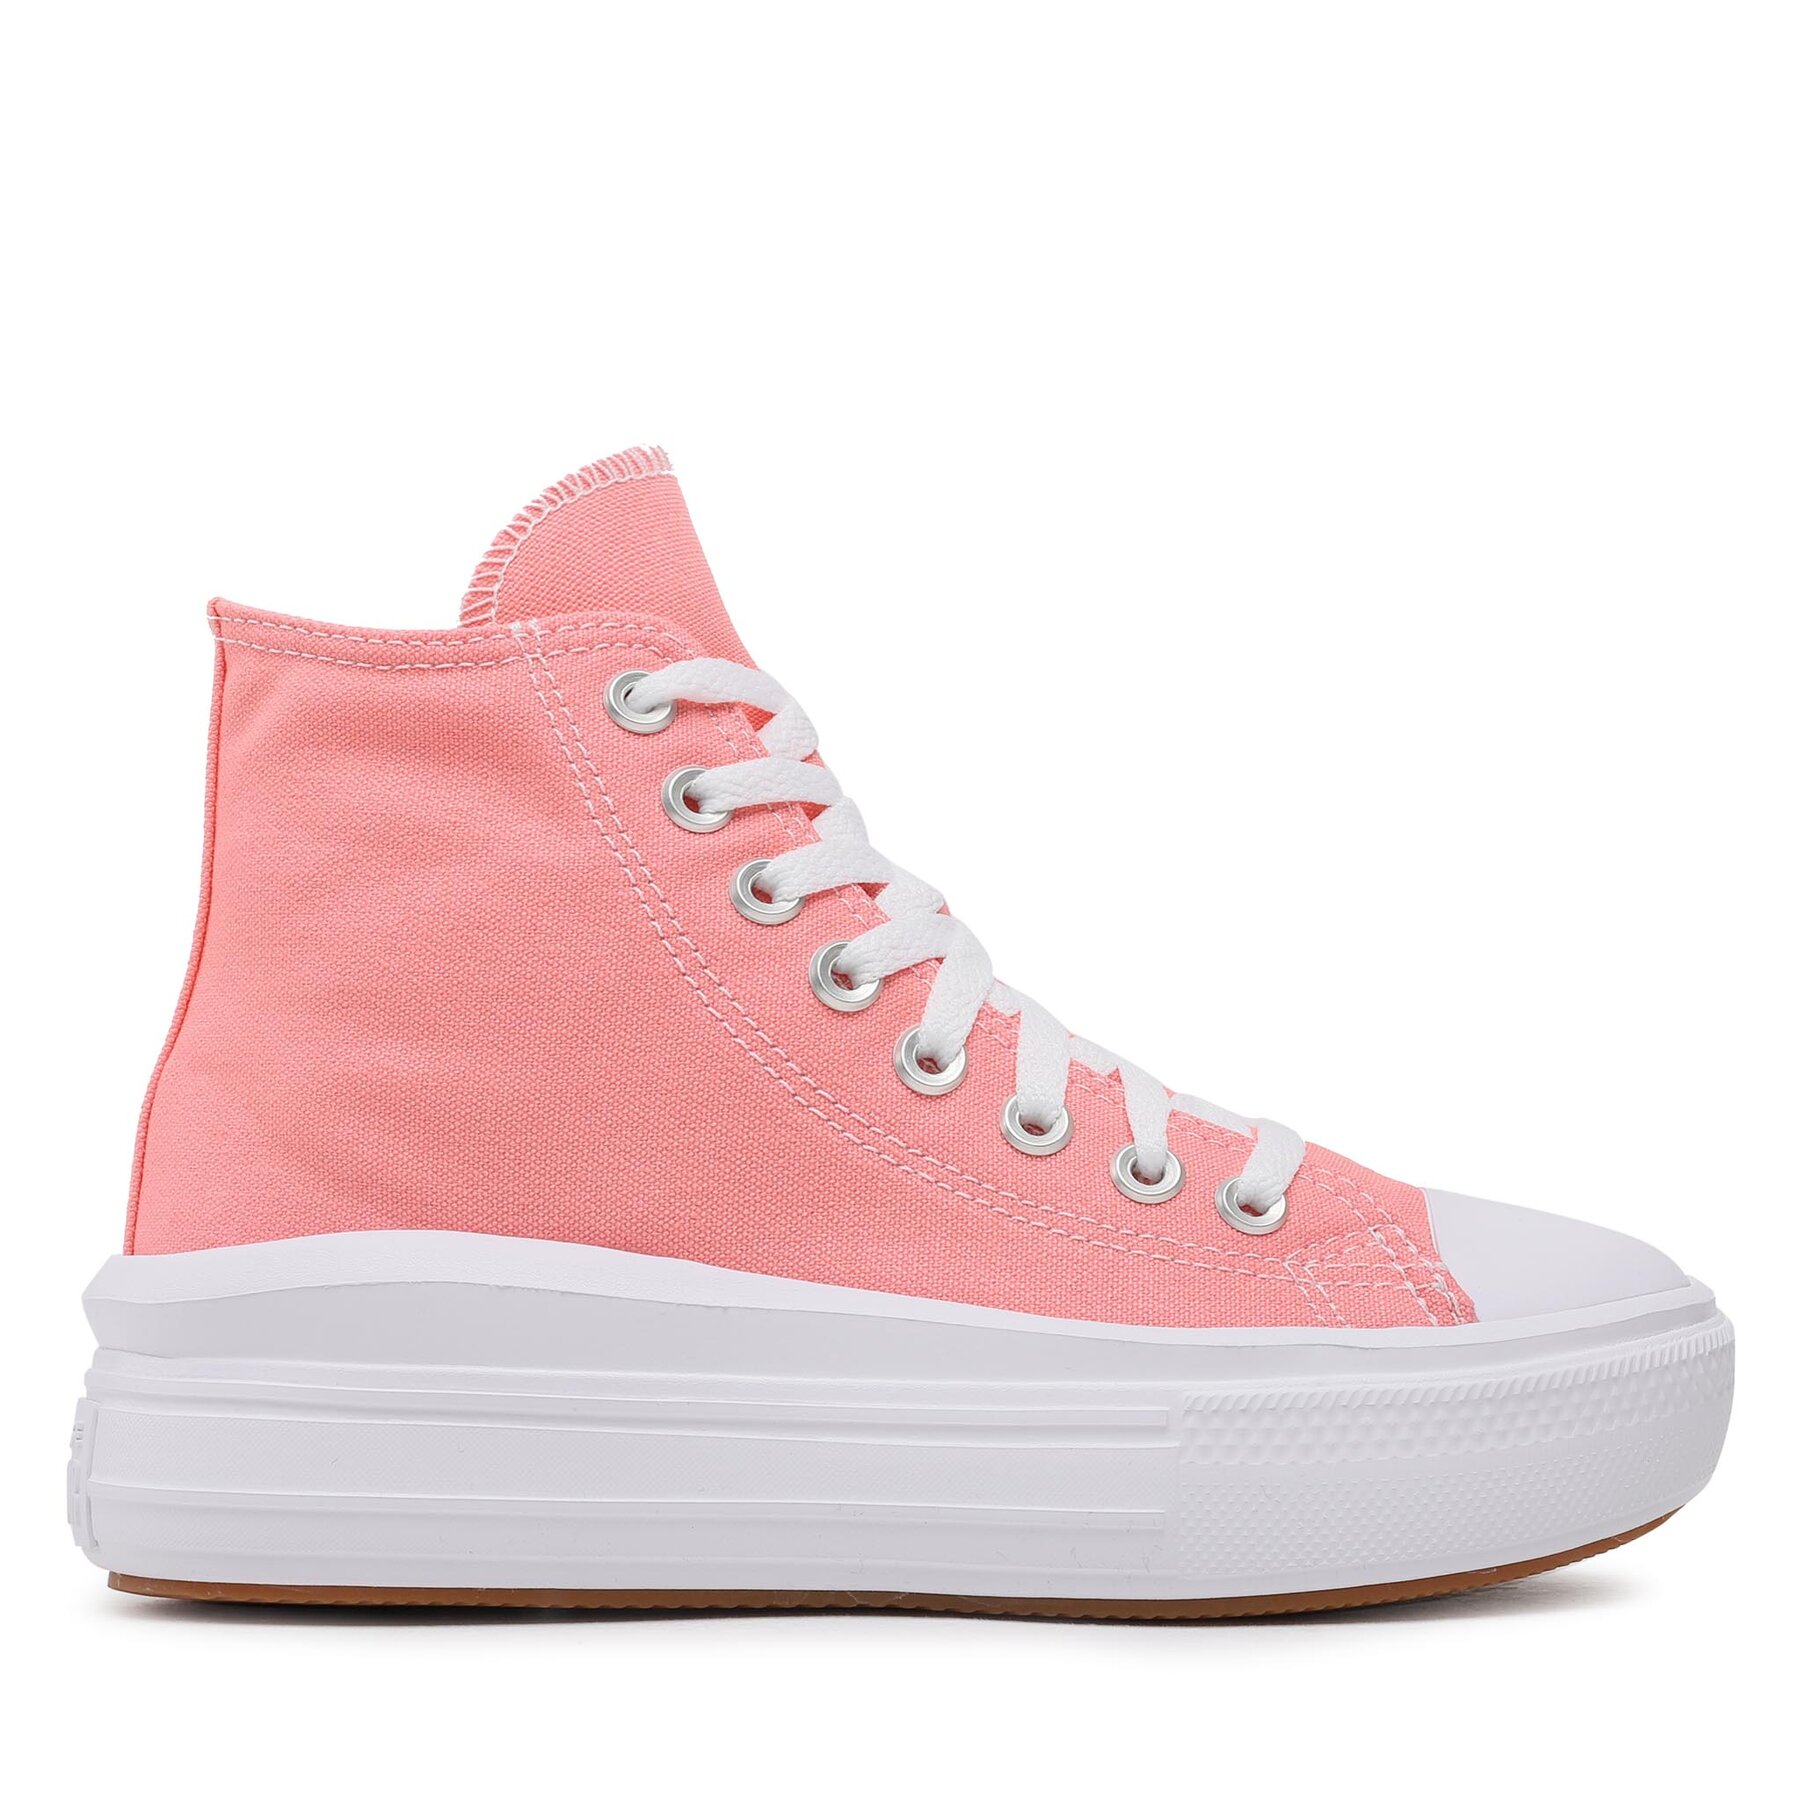 Sneakers aus Stoff Converse Chuck Taylor All Star Move A03544C Bright Pink von Converse